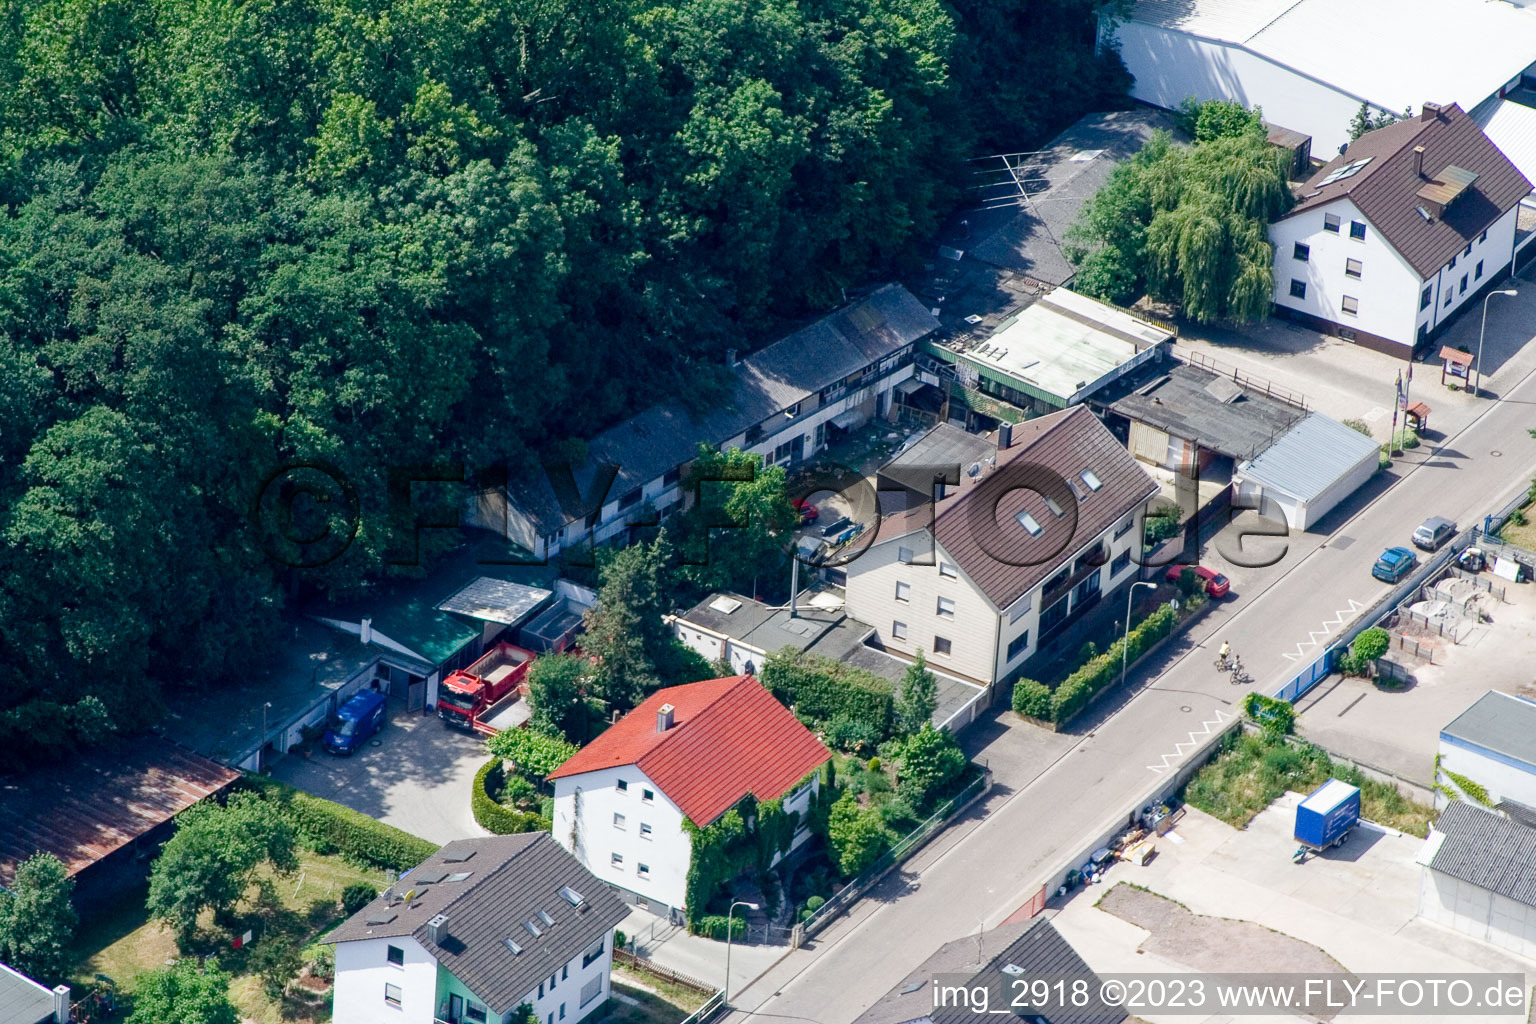 Drone image of Elsässerstr in Kandel in the state Rhineland-Palatinate, Germany